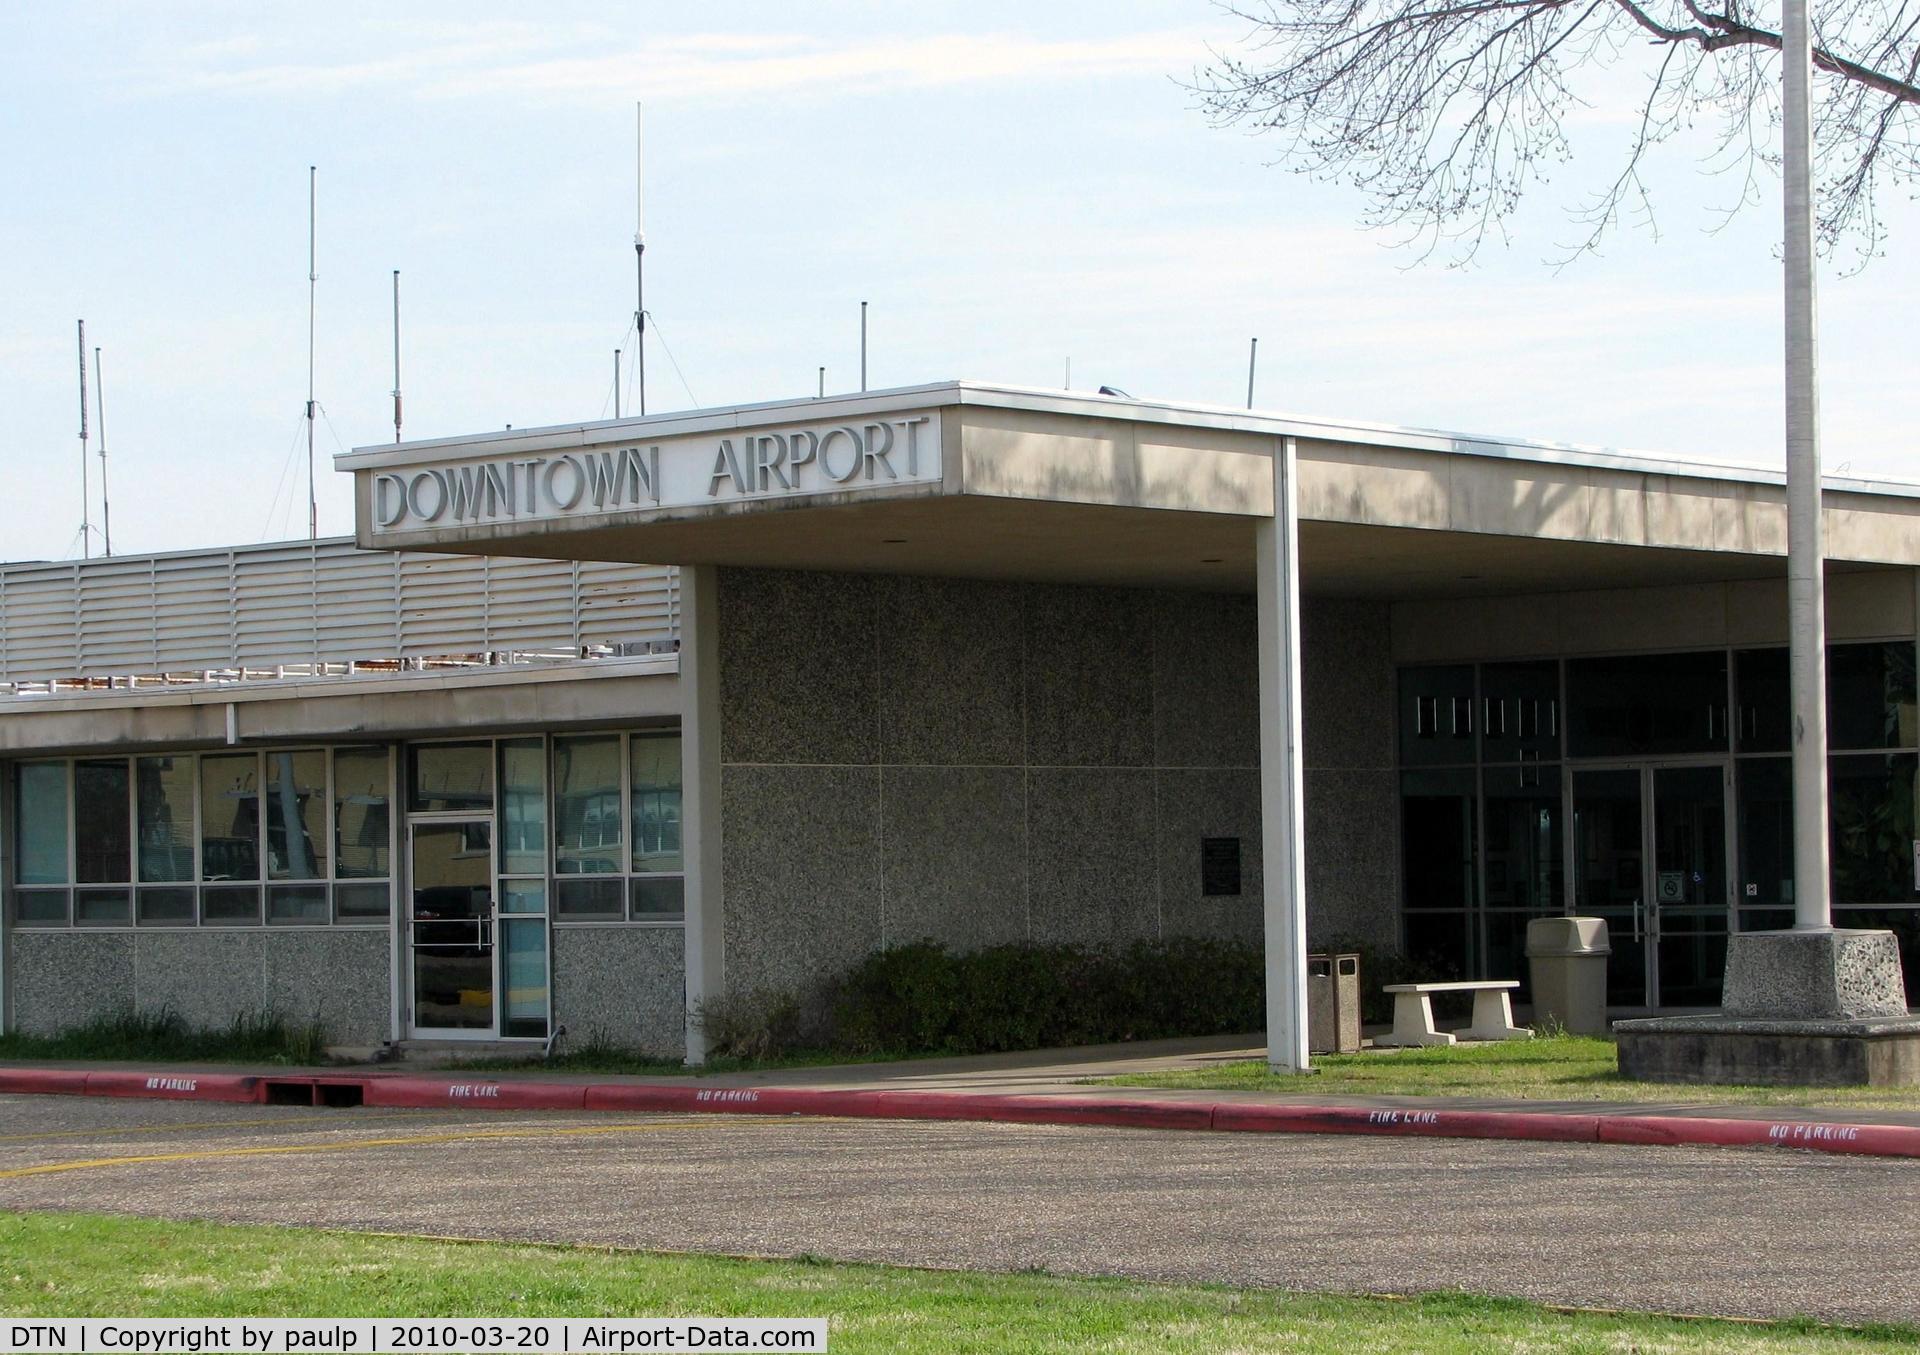 Shreveport Downtown Airport (DTN) - Front entrance to the terminal at Shreveport's Downtown Airport.